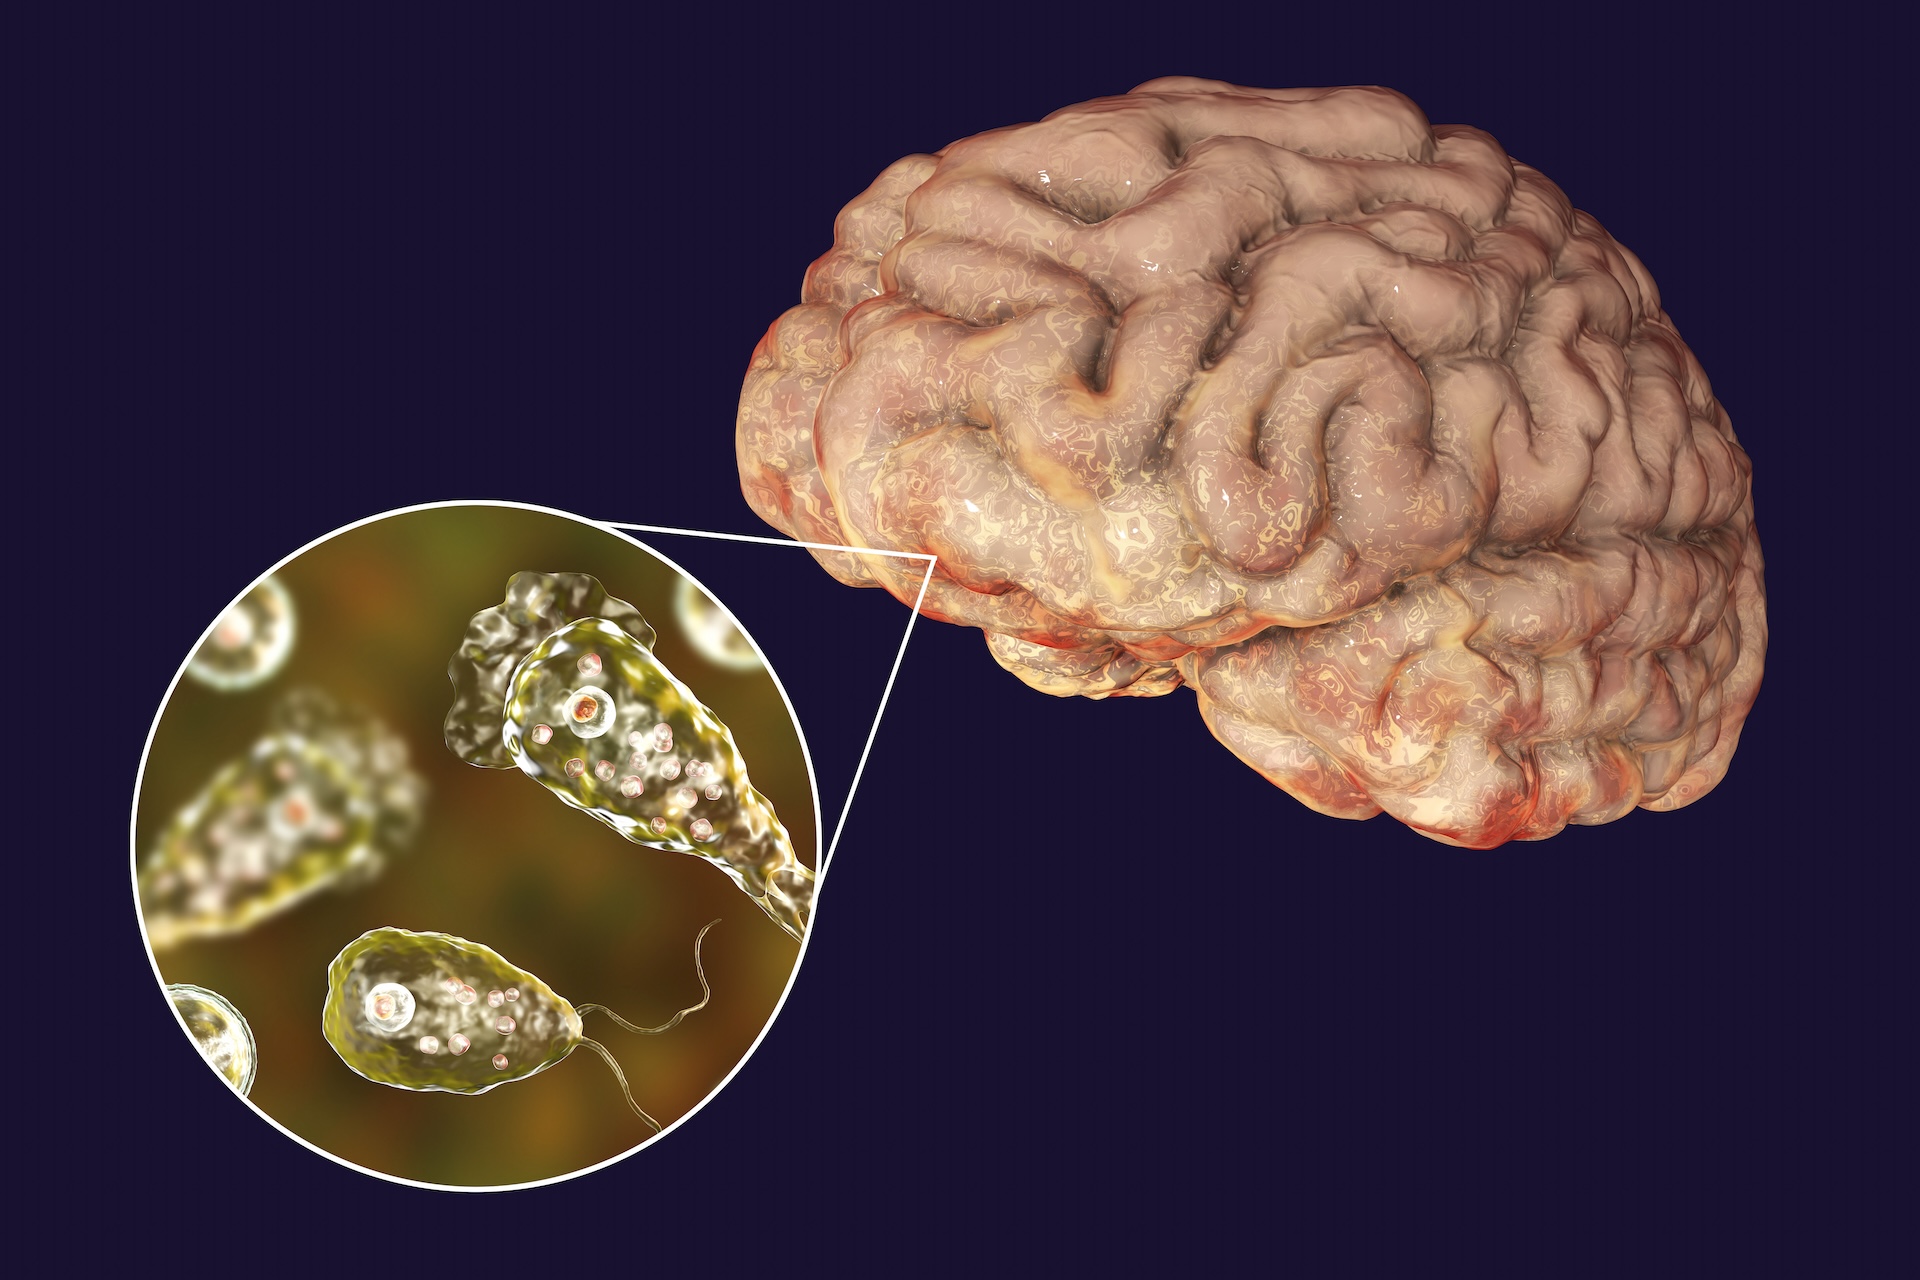 A scientific illustration showing a brain and a close-up of amoebas of the species Naegleria fowleri